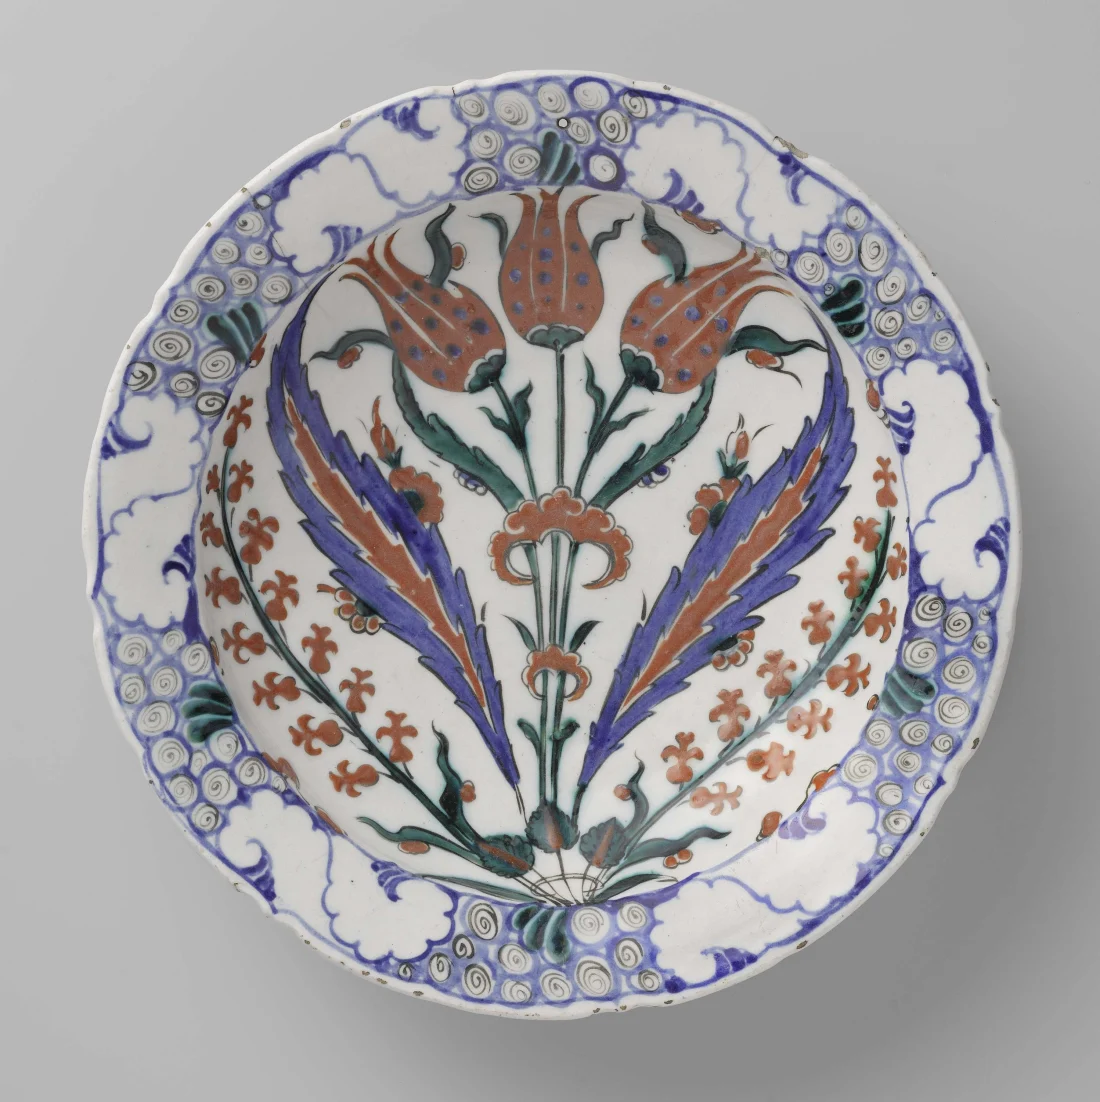 colour photograph, ceramic plate with blue, red and green floral motif